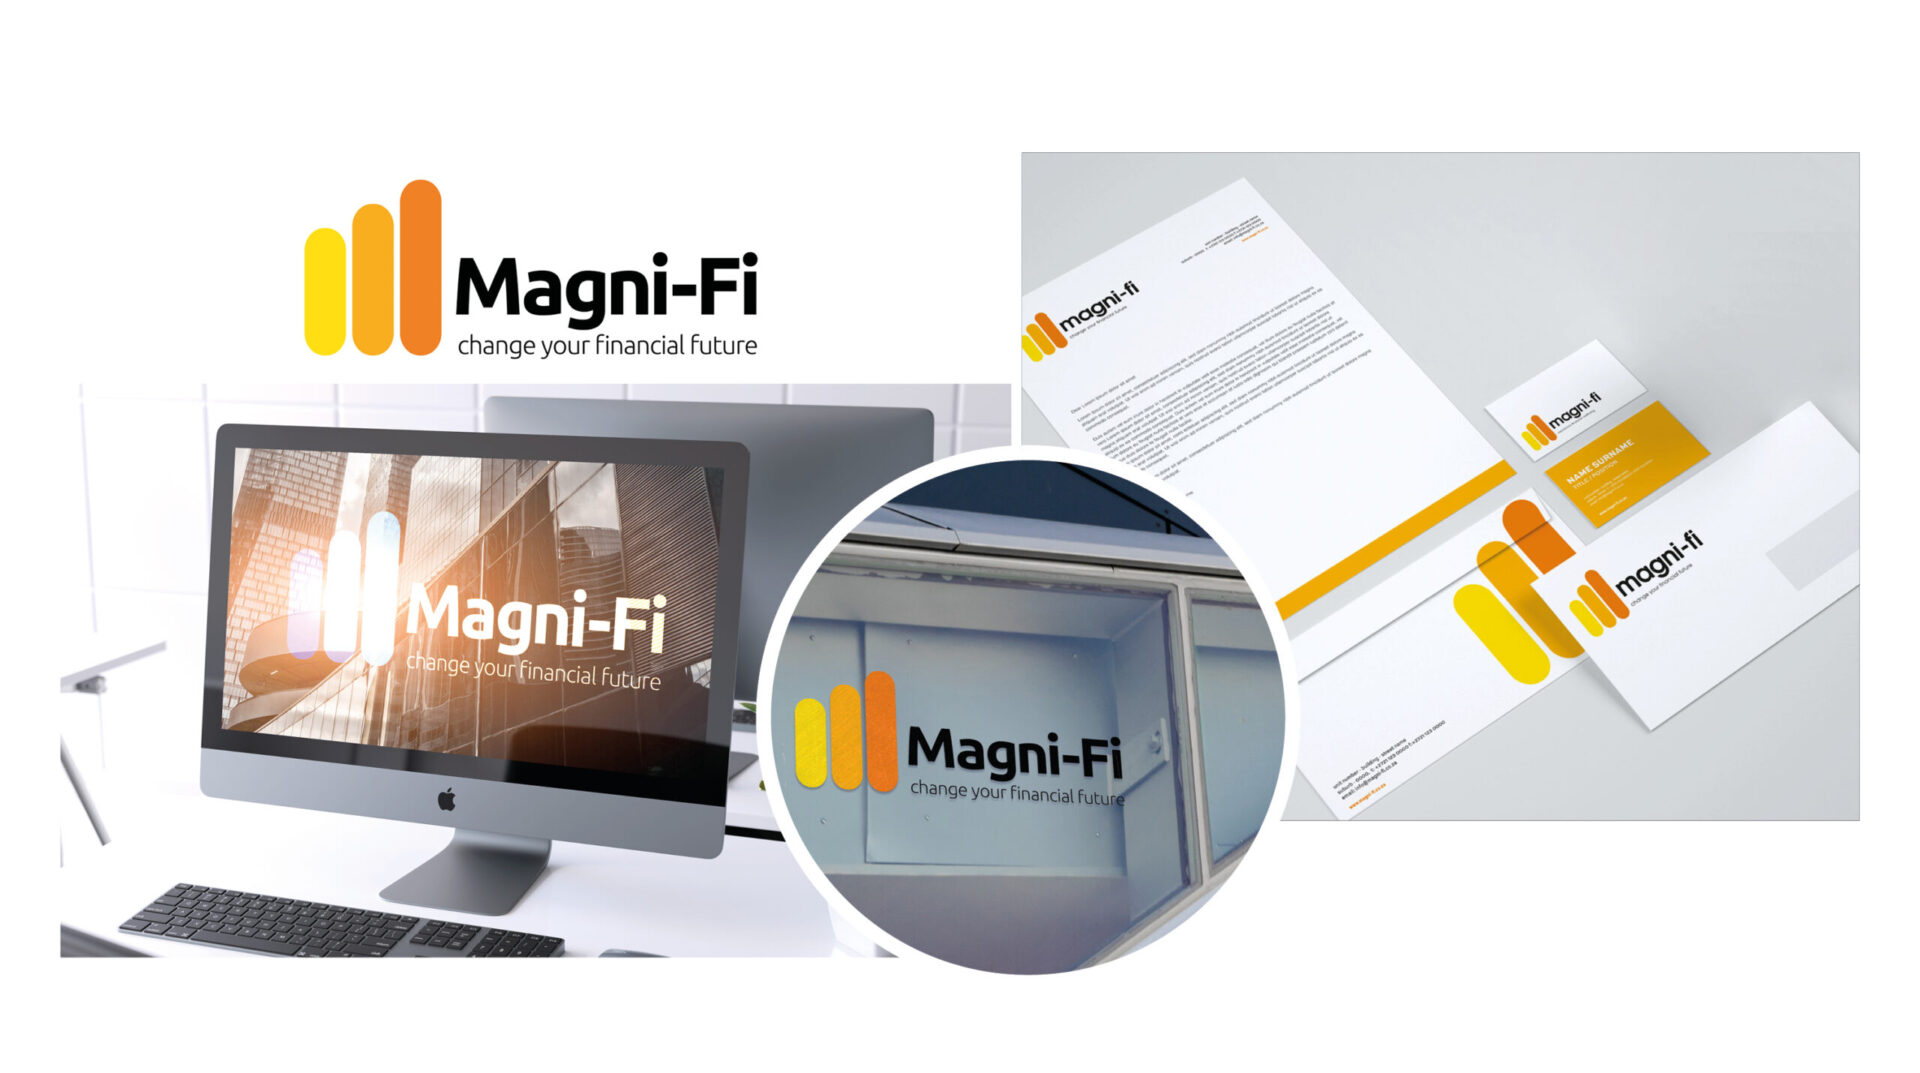 Magni-Fi corporate identity and web and digital design by berge farrell deisng. mock-ups on computer, letterhead and building